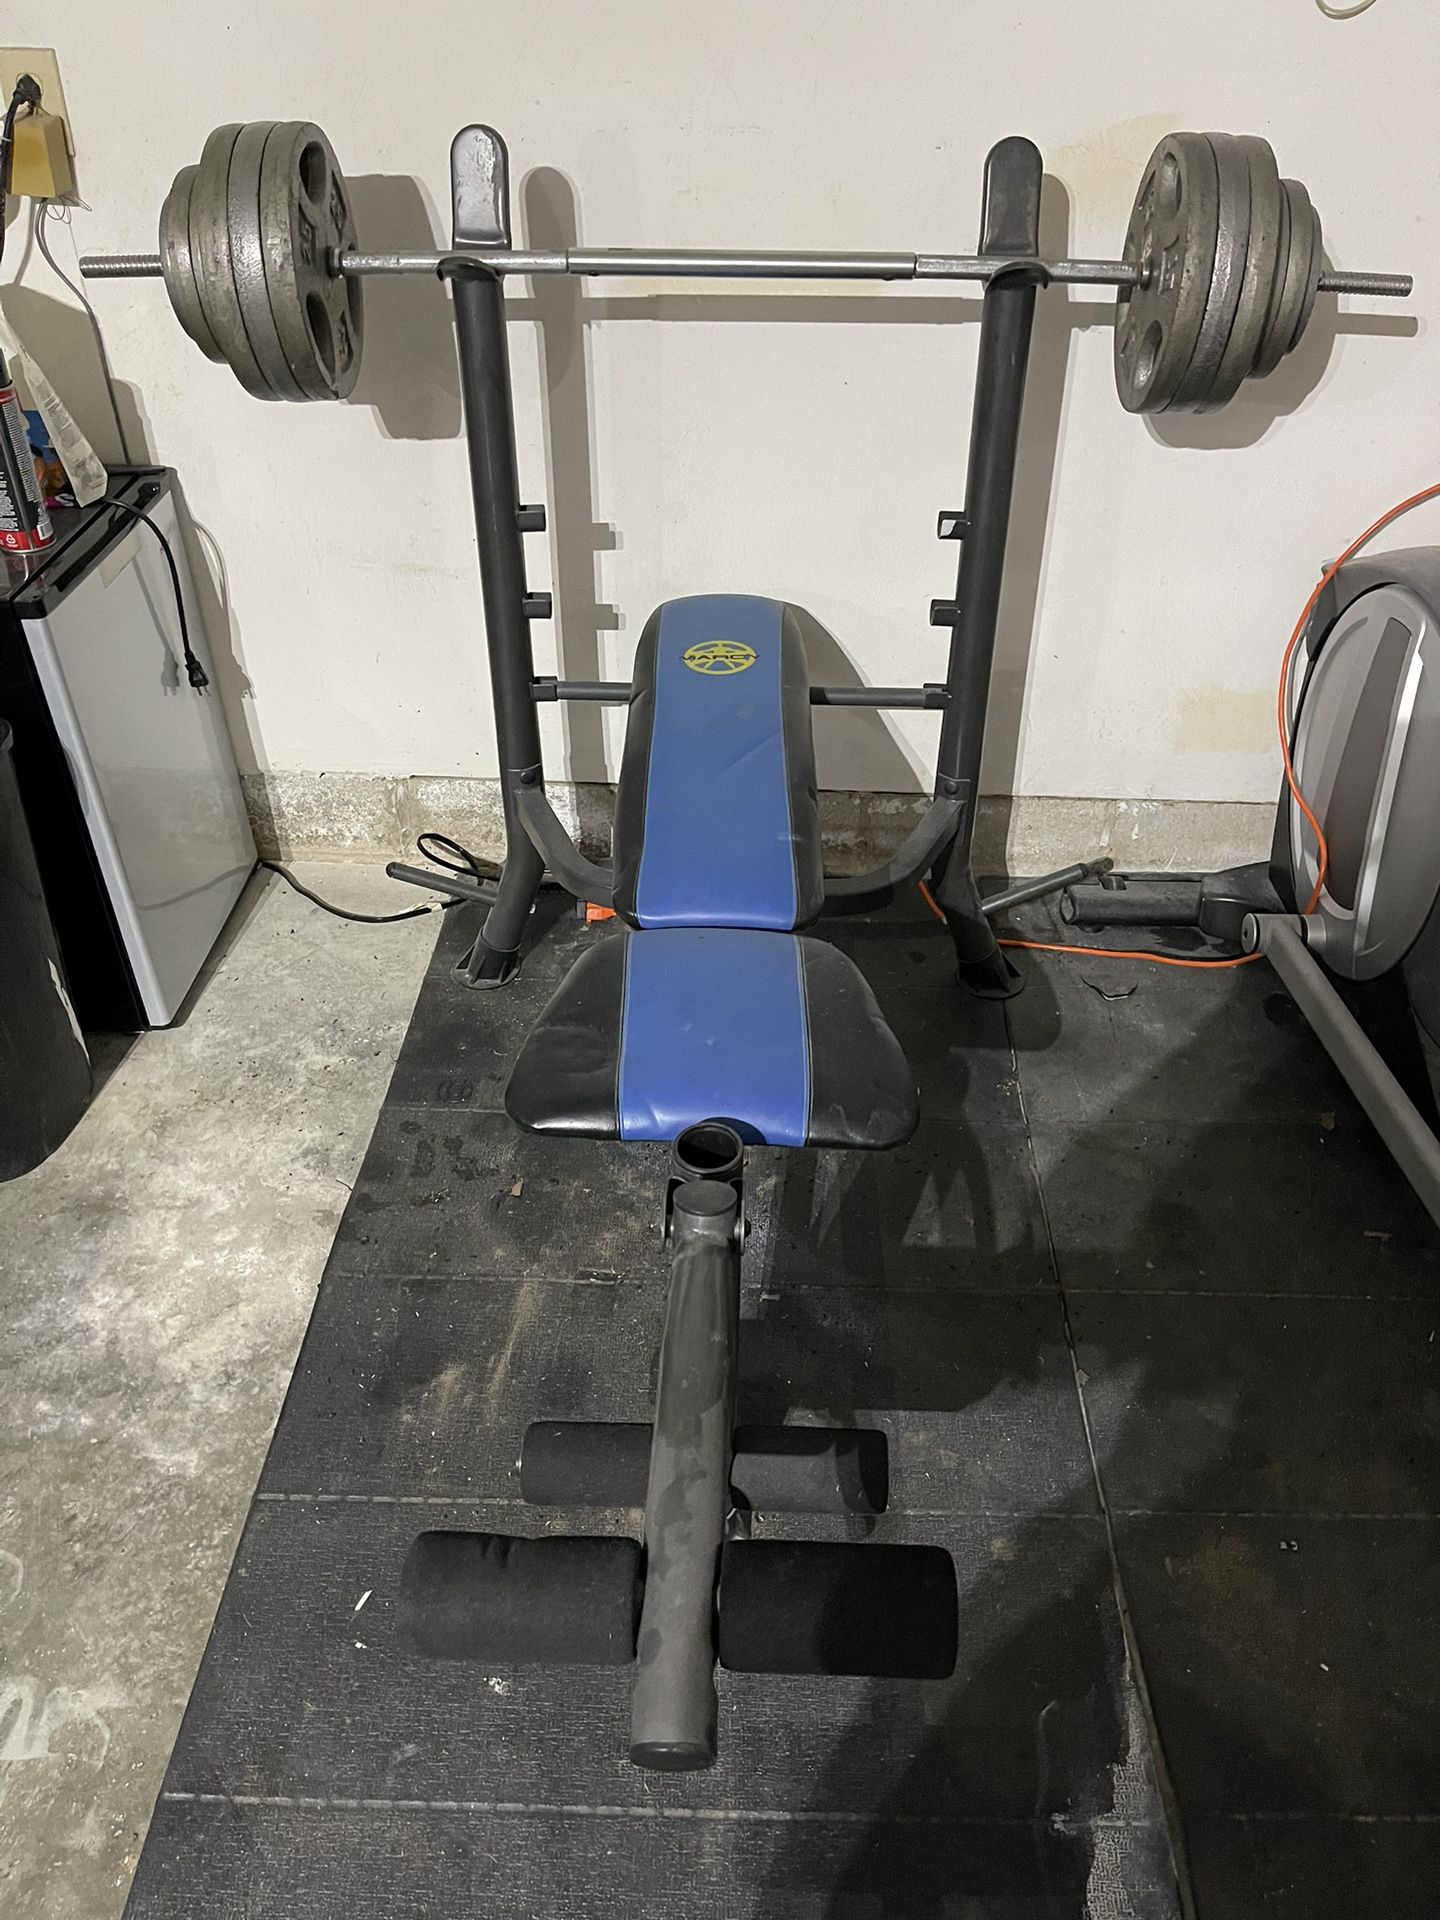 Adjustable Bench Press With Leg Atachment